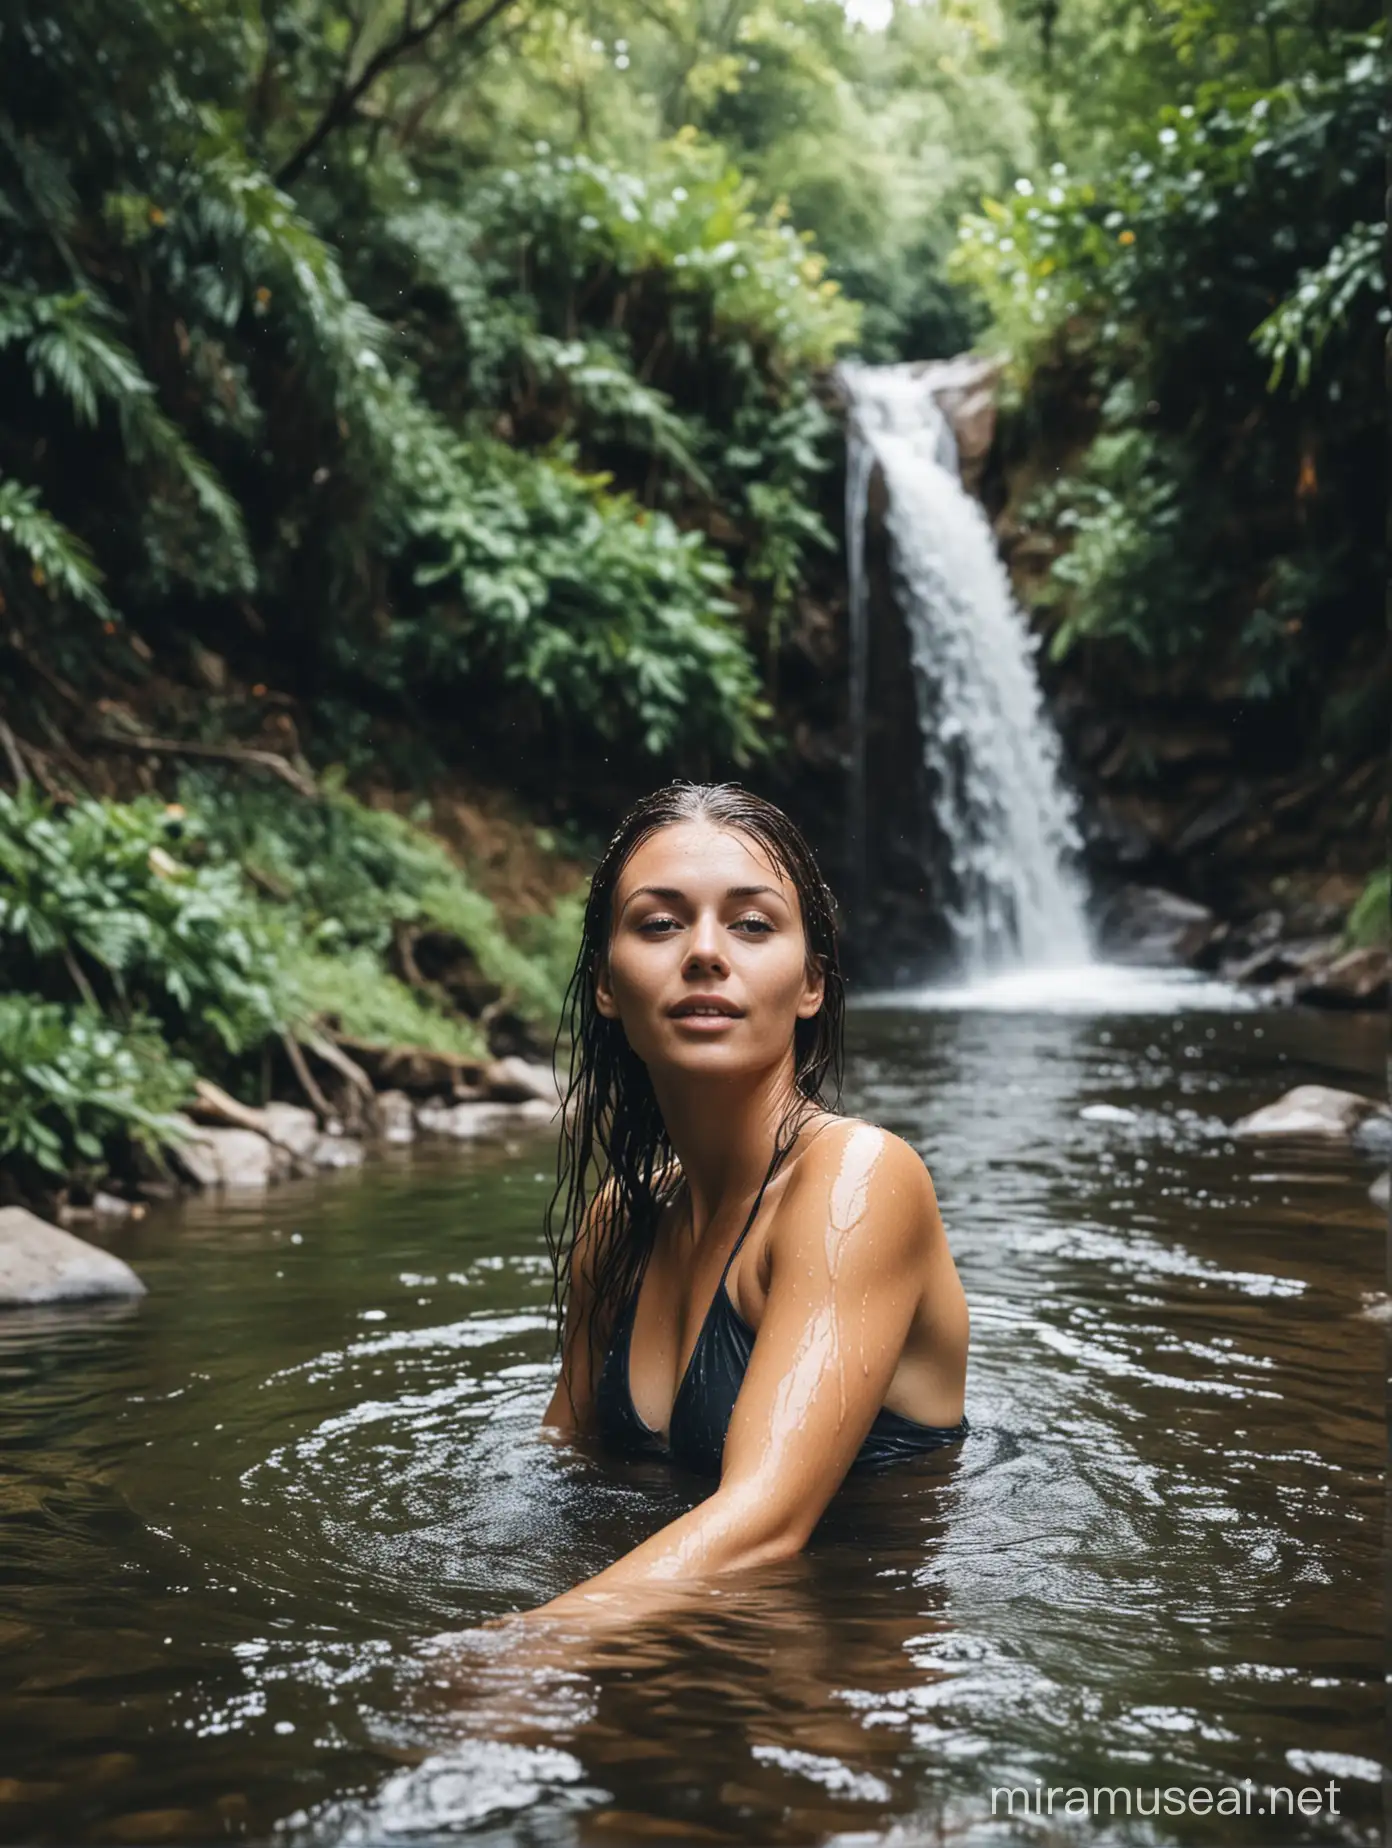 Image of a woman with wet hair, swimming, a creek, waterfall.